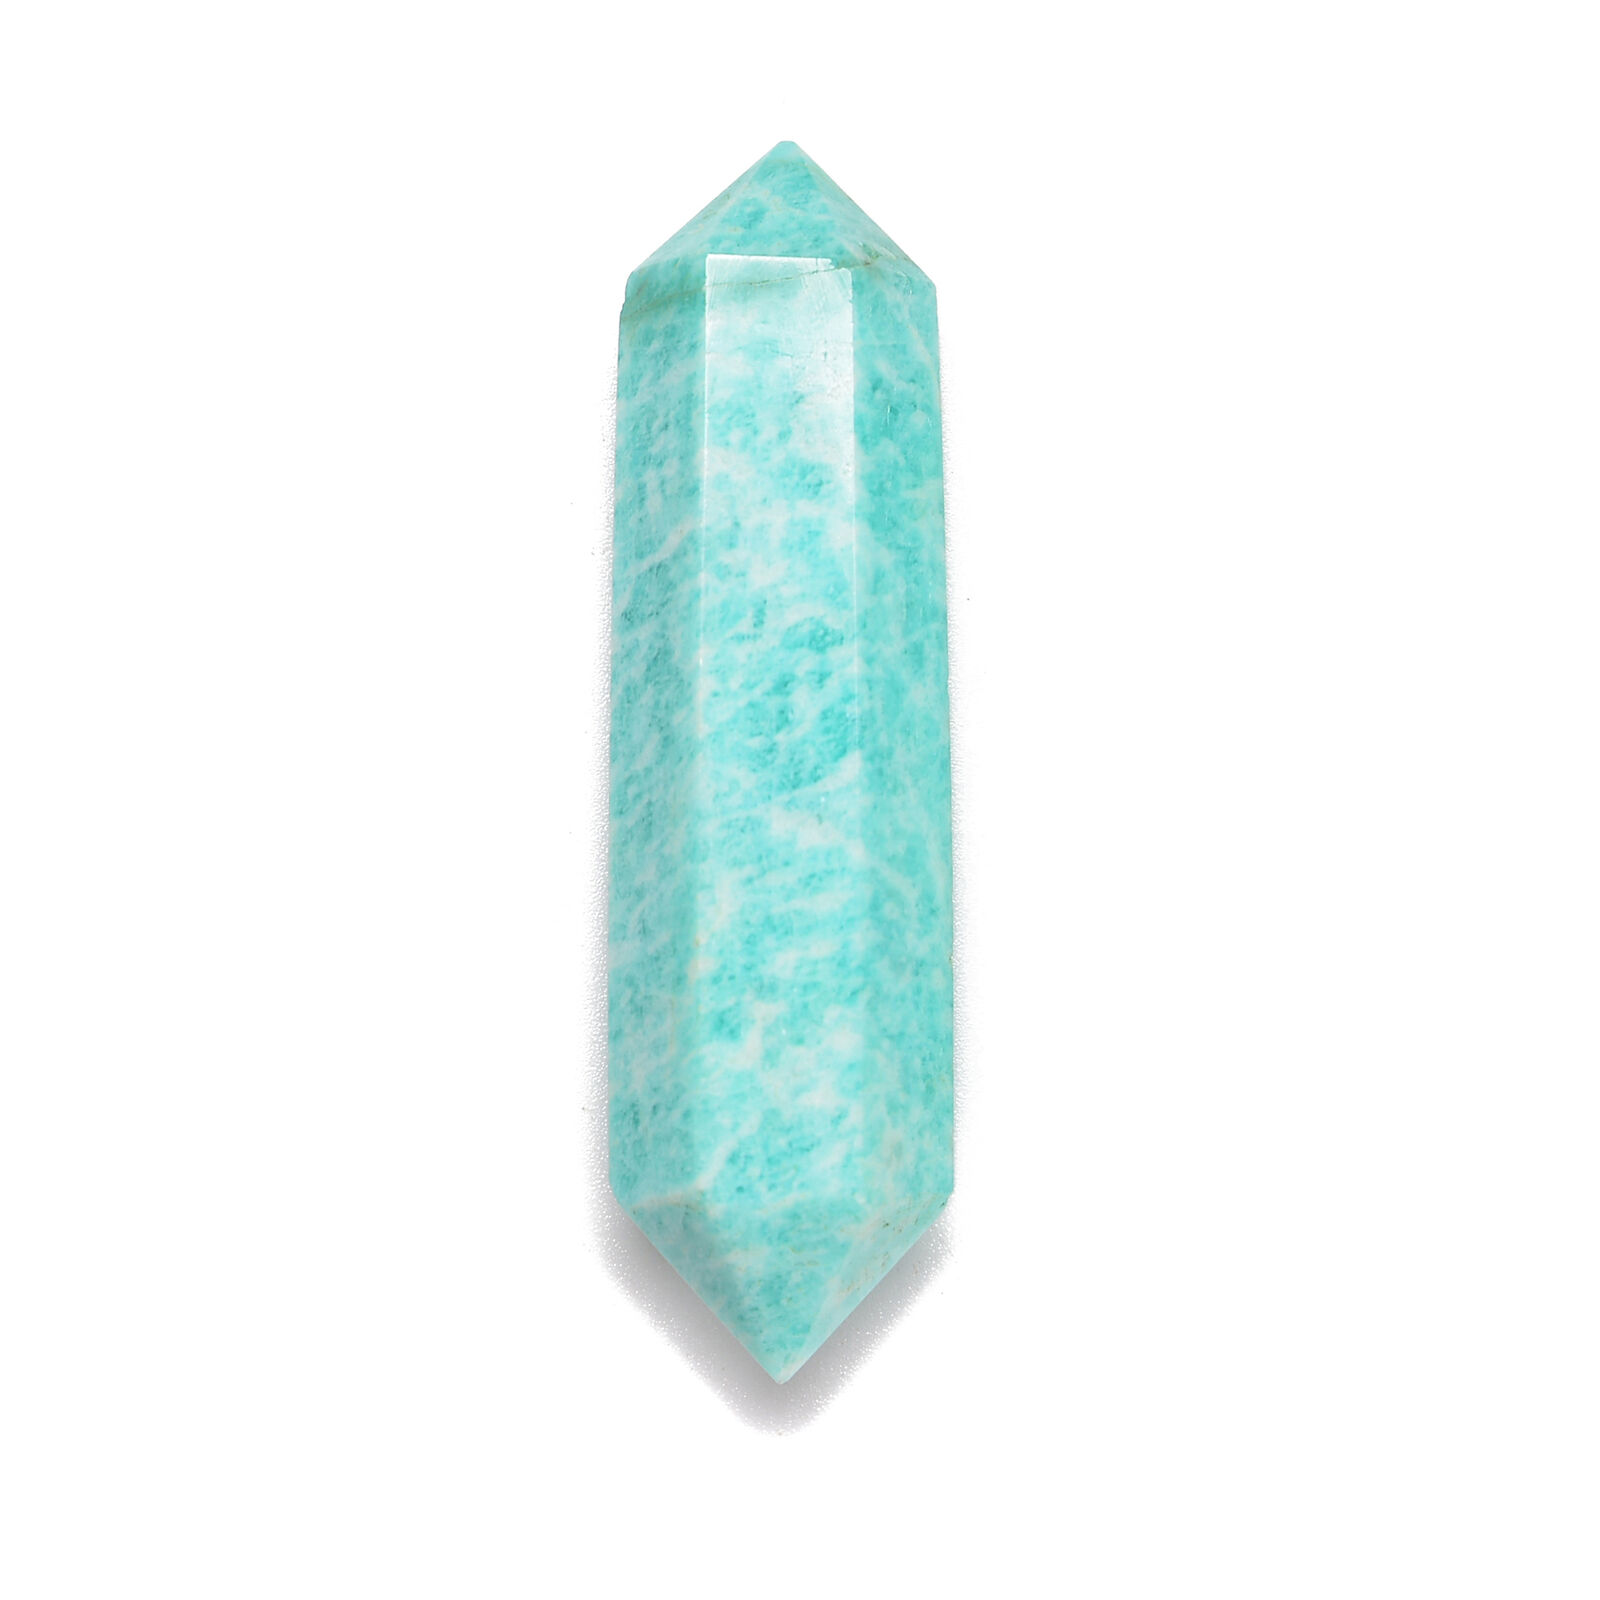 Green Amazonite Double Point Size 12x55mm Sold by Piece (Green Amazonite)